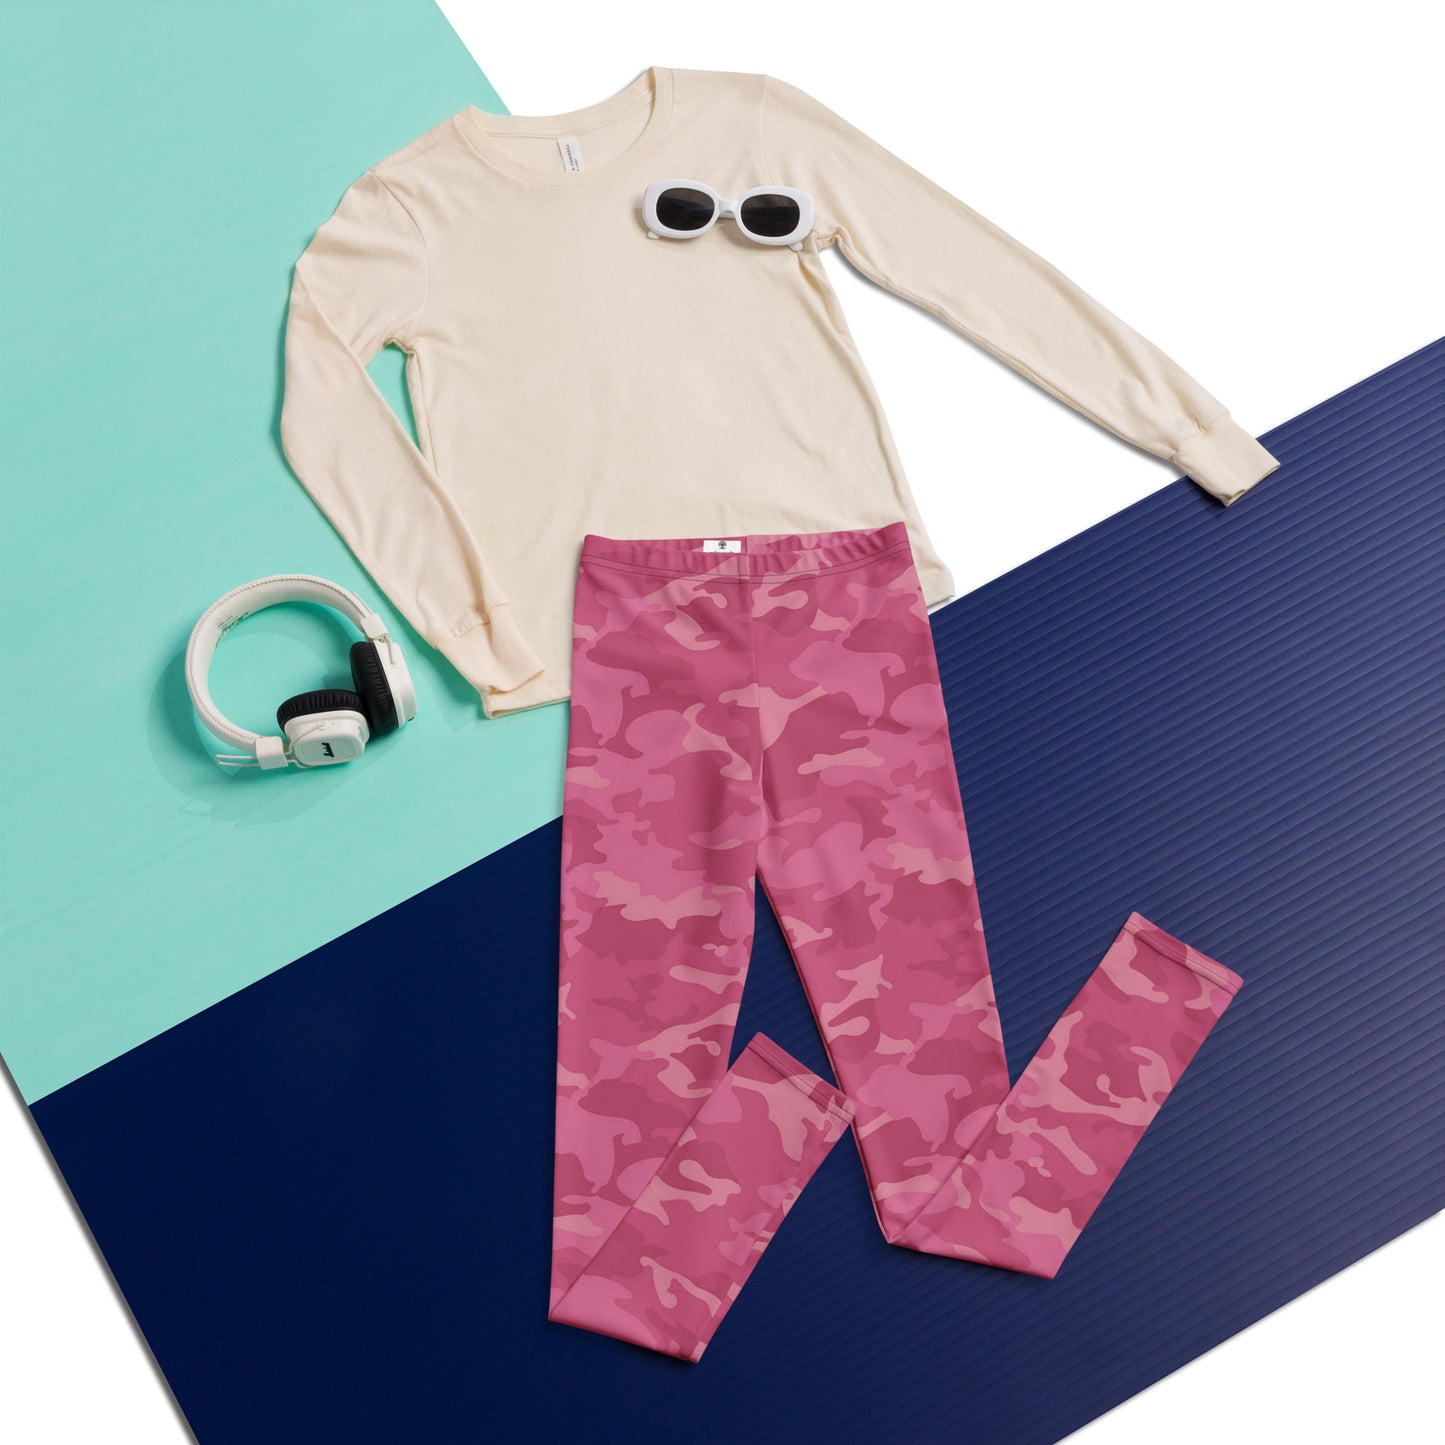 Youth Leggings  - Pink Pink Camouflage